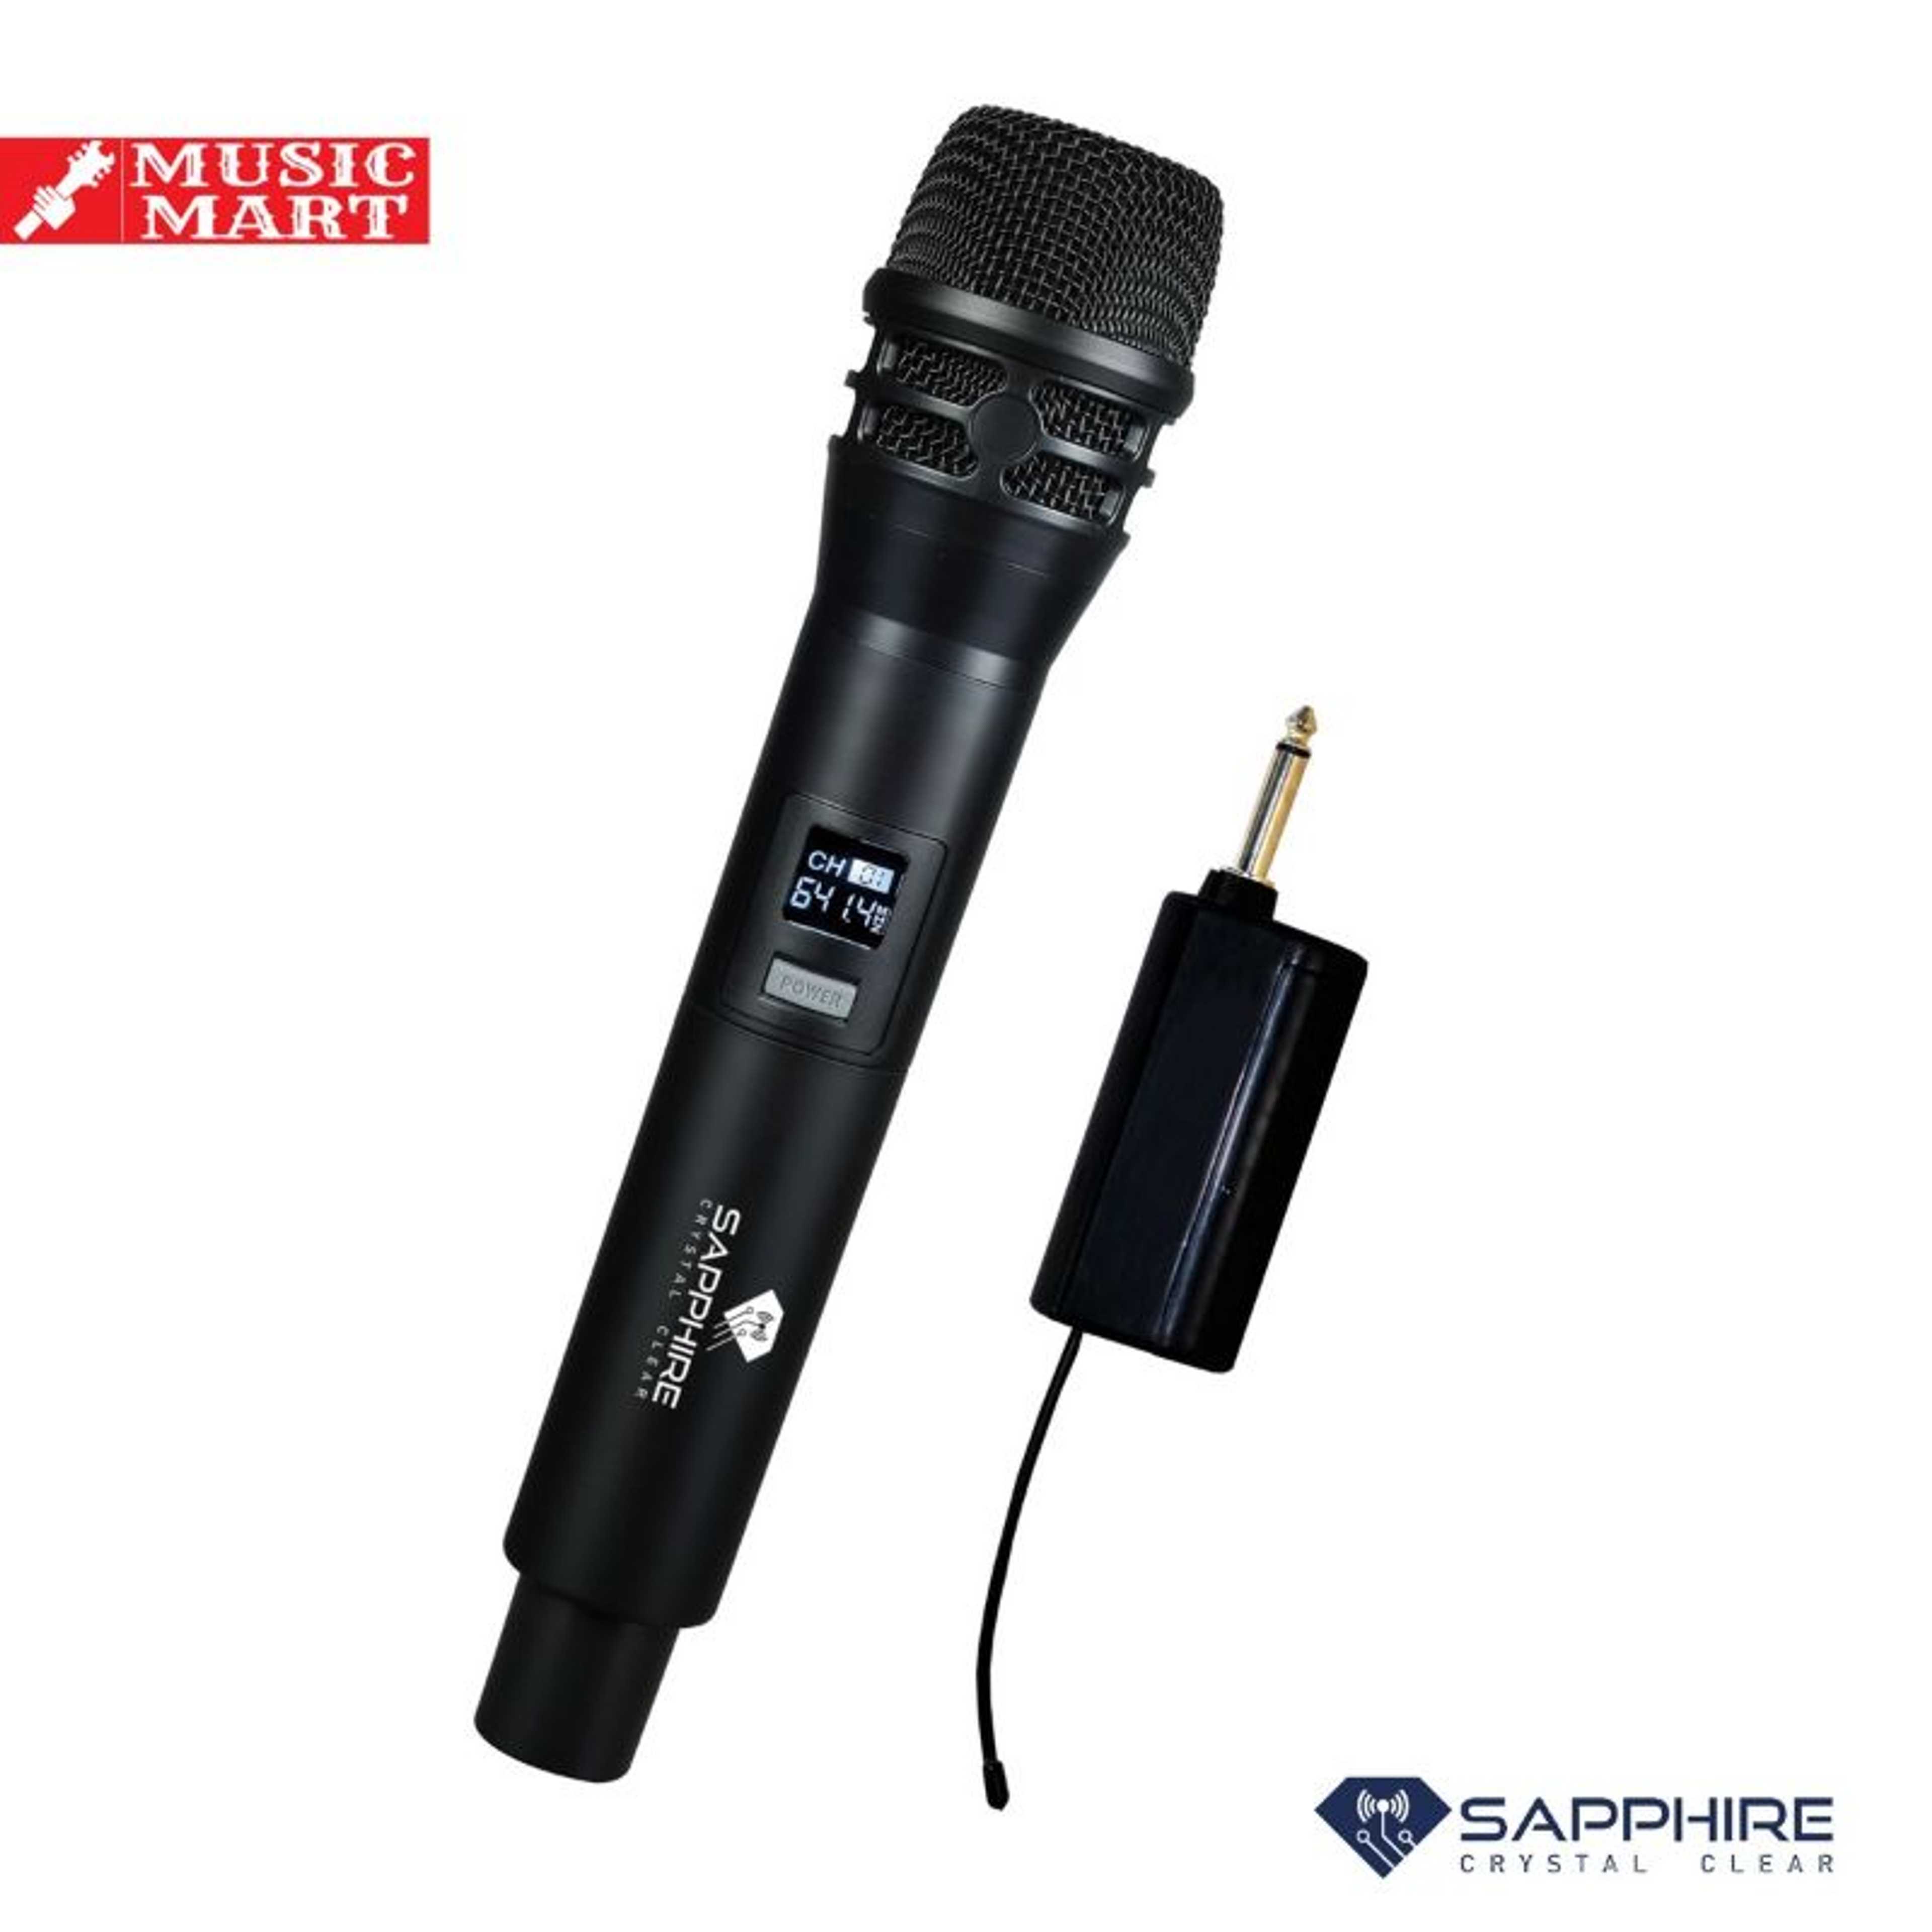 WIRELESS DYNAMIC MICROPHONE - HIGH FREQUENCY - EXCELLENT SOUND QUALITY - HIGH RATED ALL OVER THE WORLD - EASY JUST PLUG AND PLAY - ELEGANT DESIGN - Dual Handheld Dynamic Mic System Set with Rechargeable Receiver, 160ft Range, ) Plug, for Karaoke